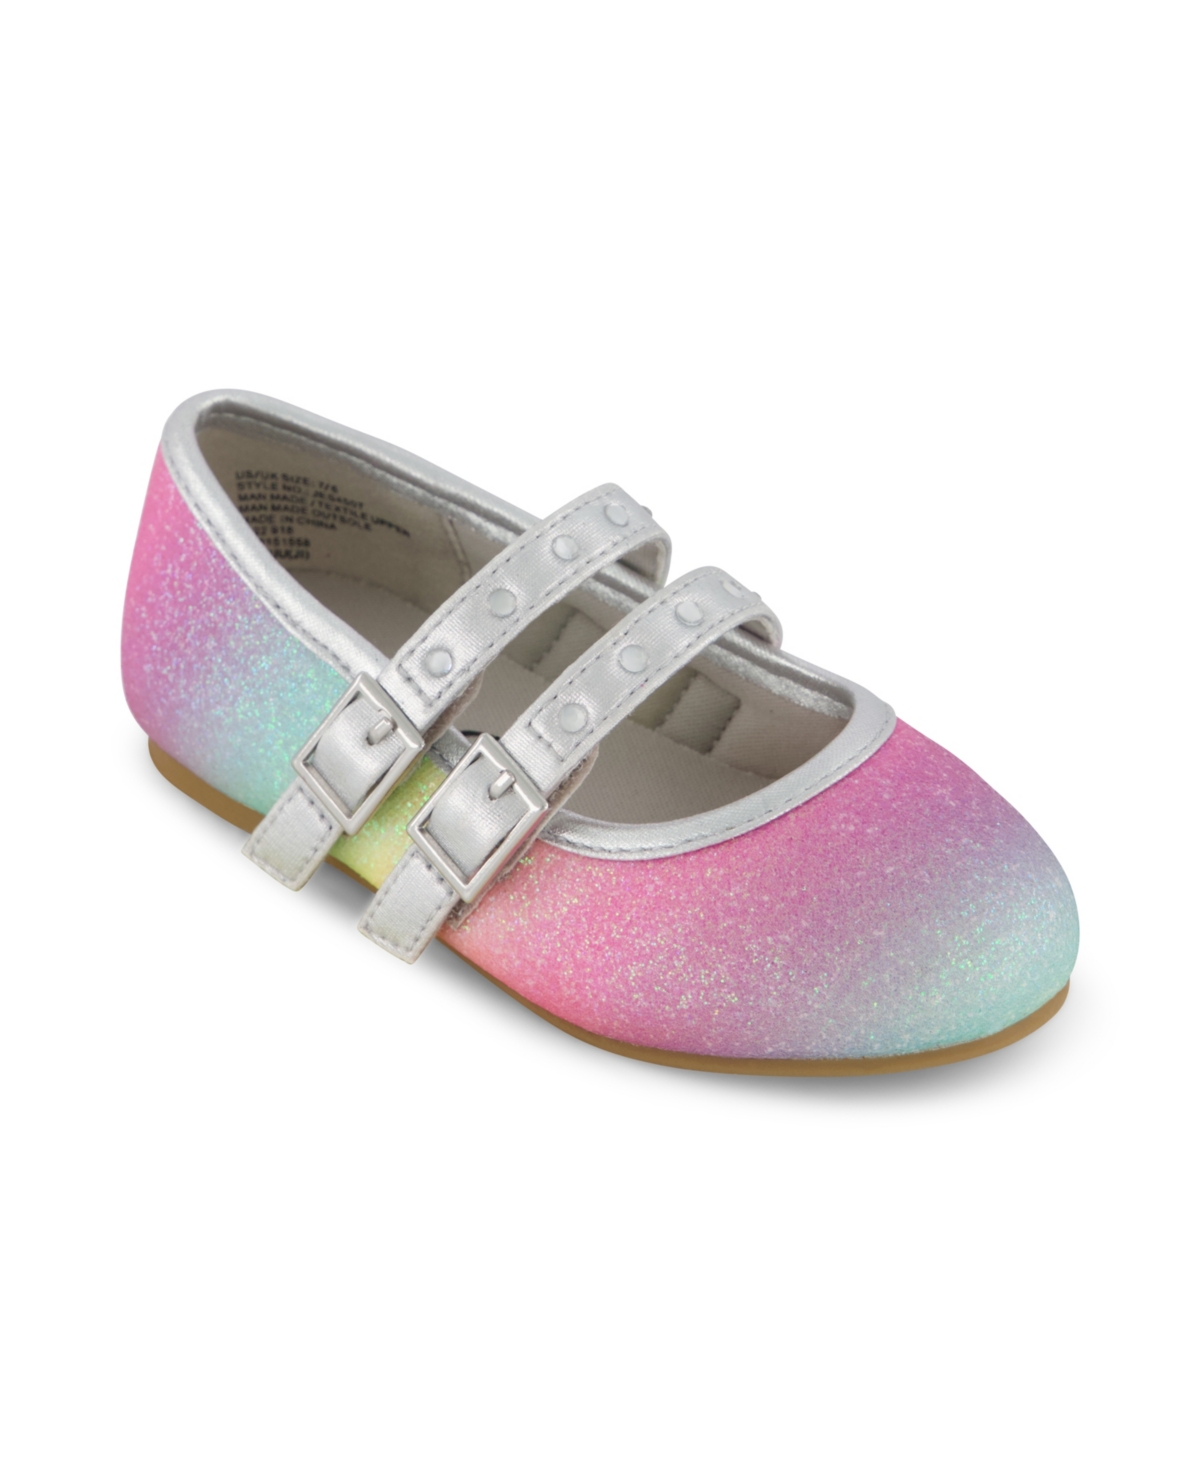 Jessica Simpson Toddler Girls Mary Jane Ballet Flat Shoes In Silver Multi